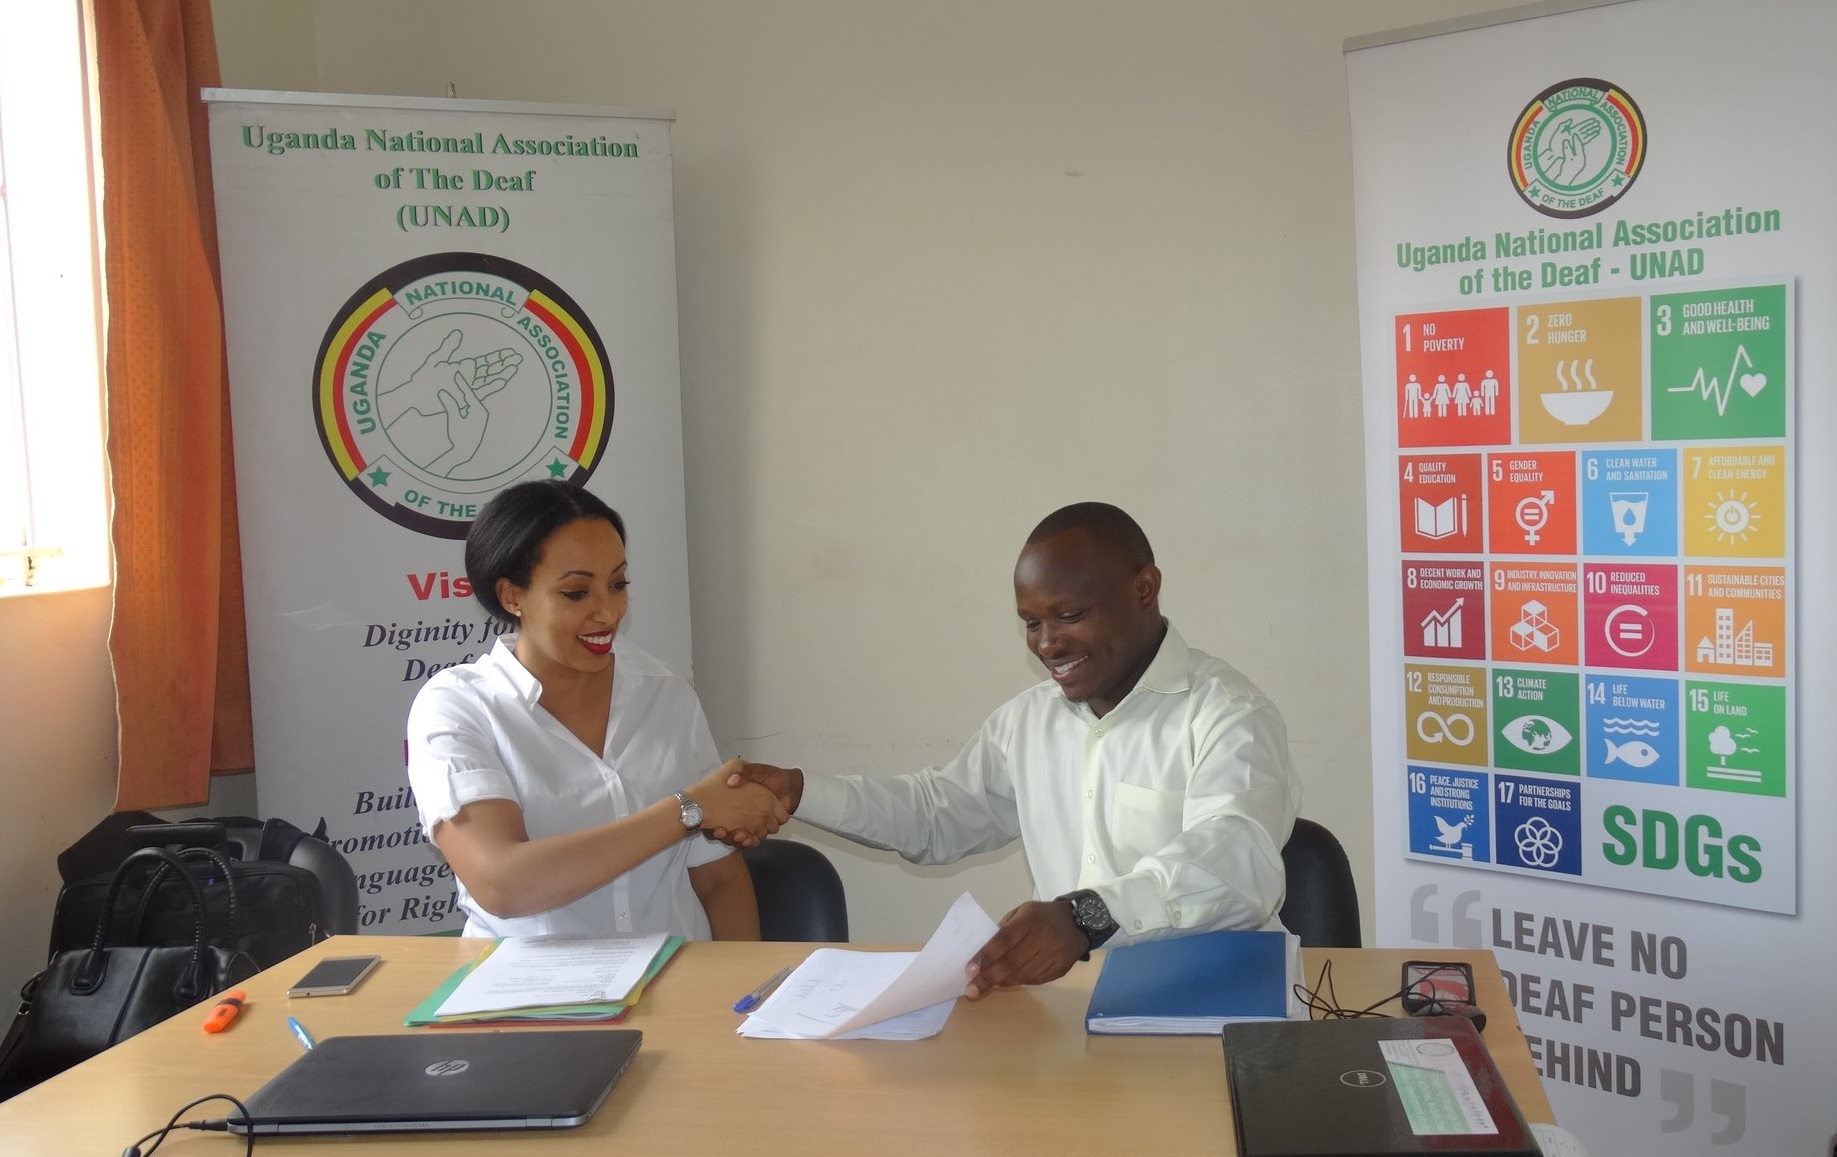 Spider programme manager, Magda Berhe Johnson and UNAD's Ambrose Murangira signing the project agreement